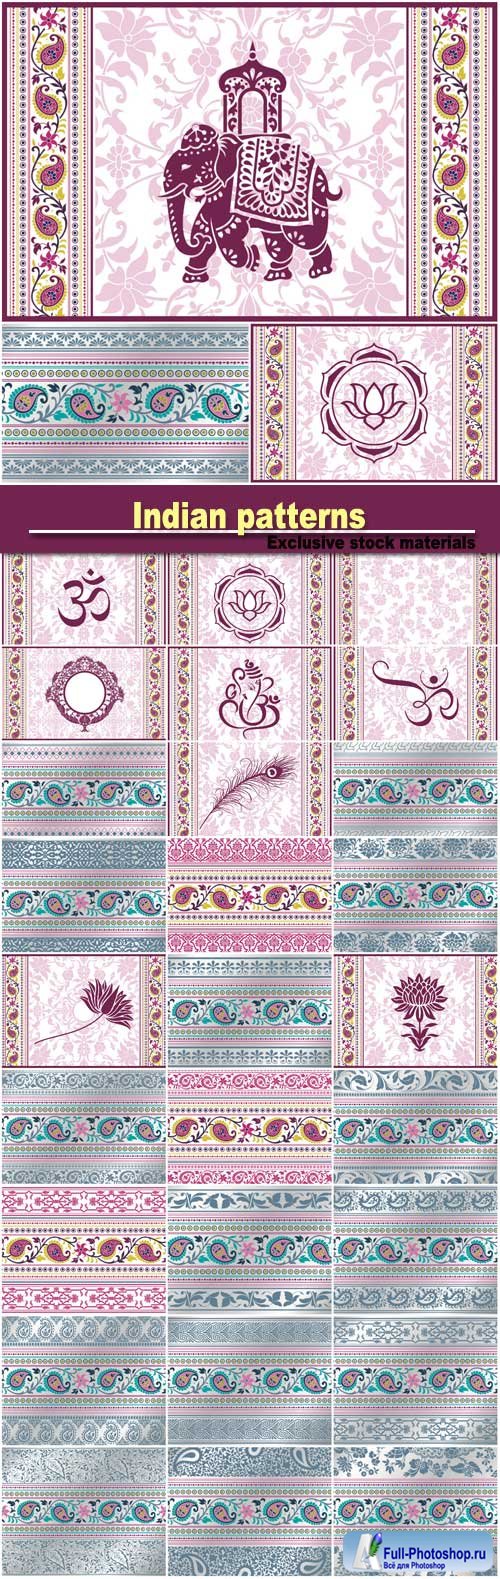 Vector background with Indian patterns and symbols